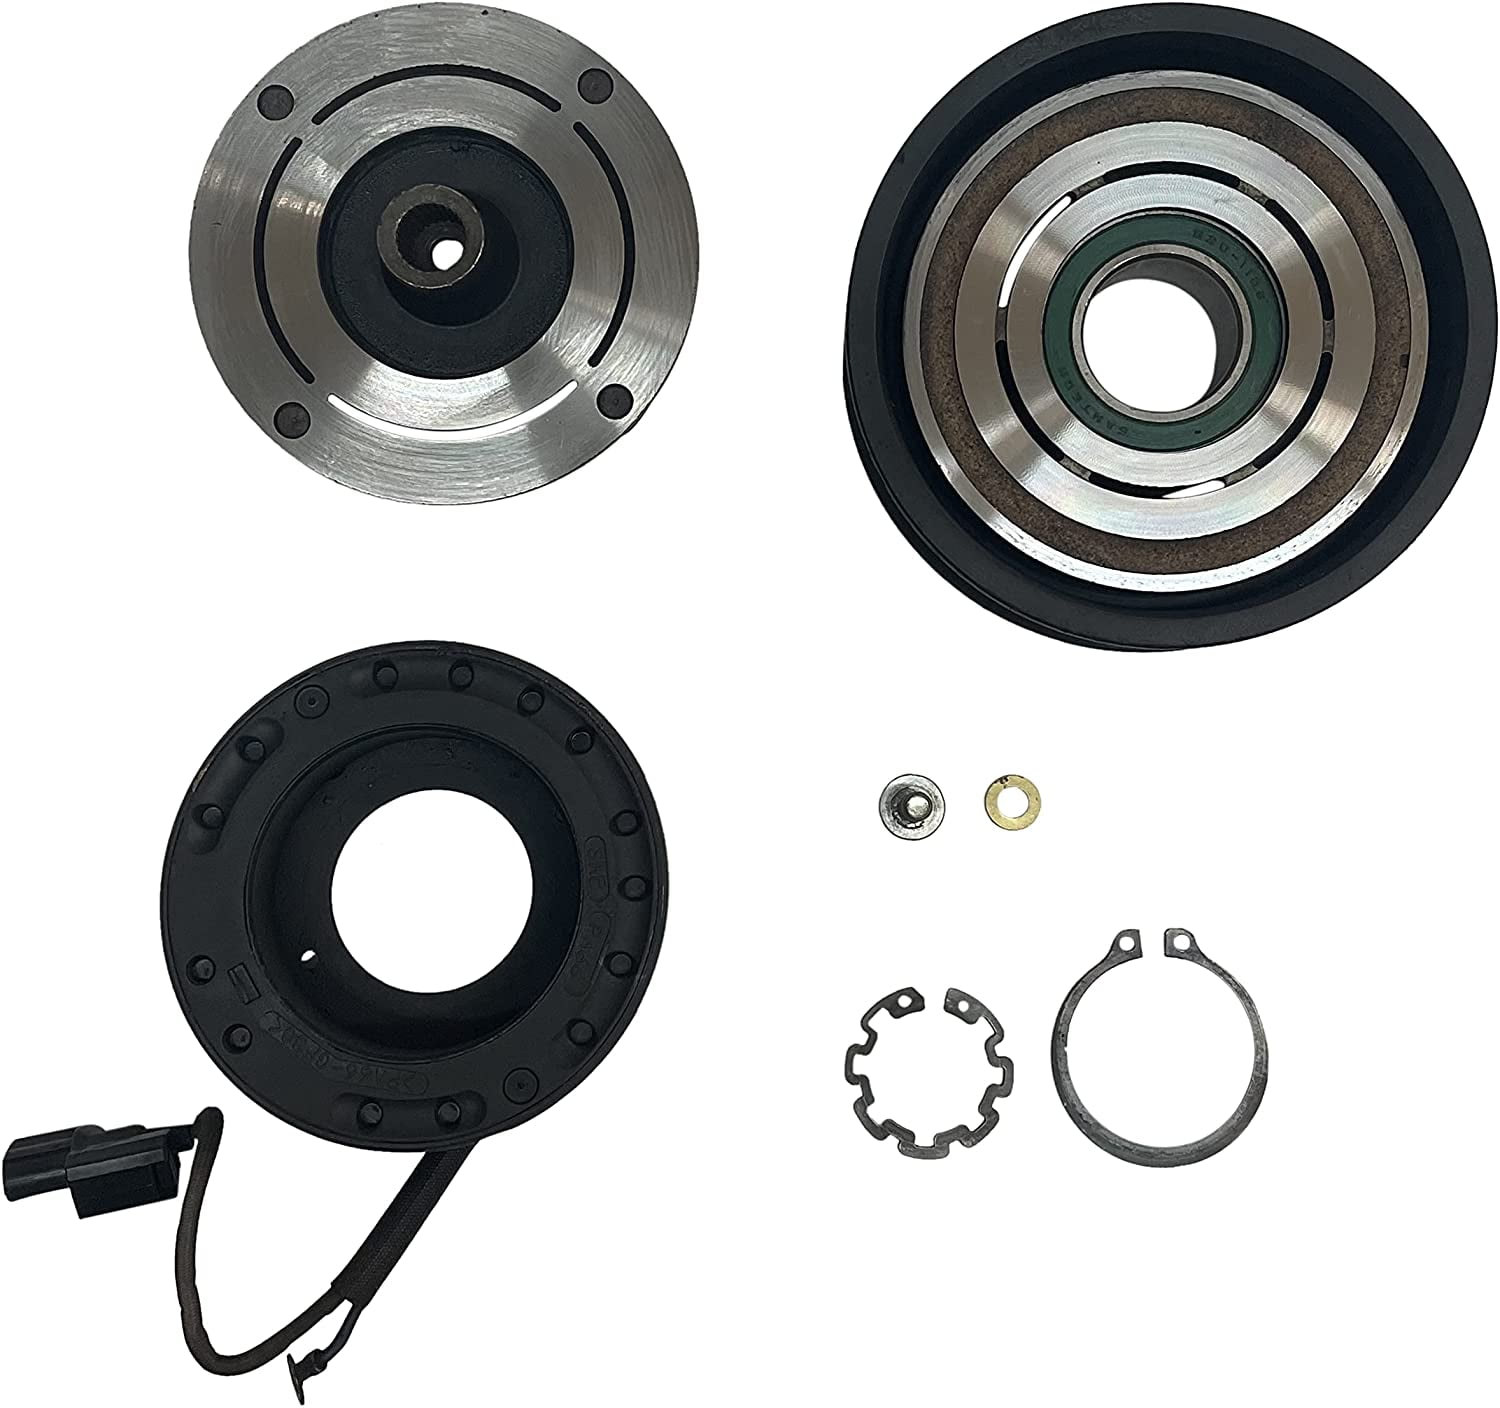 CoolTech AC Compressor Clutch KIT Pulley Coil Plate FITS 2001 2002 Honda Accord 6CYL 3.0L 